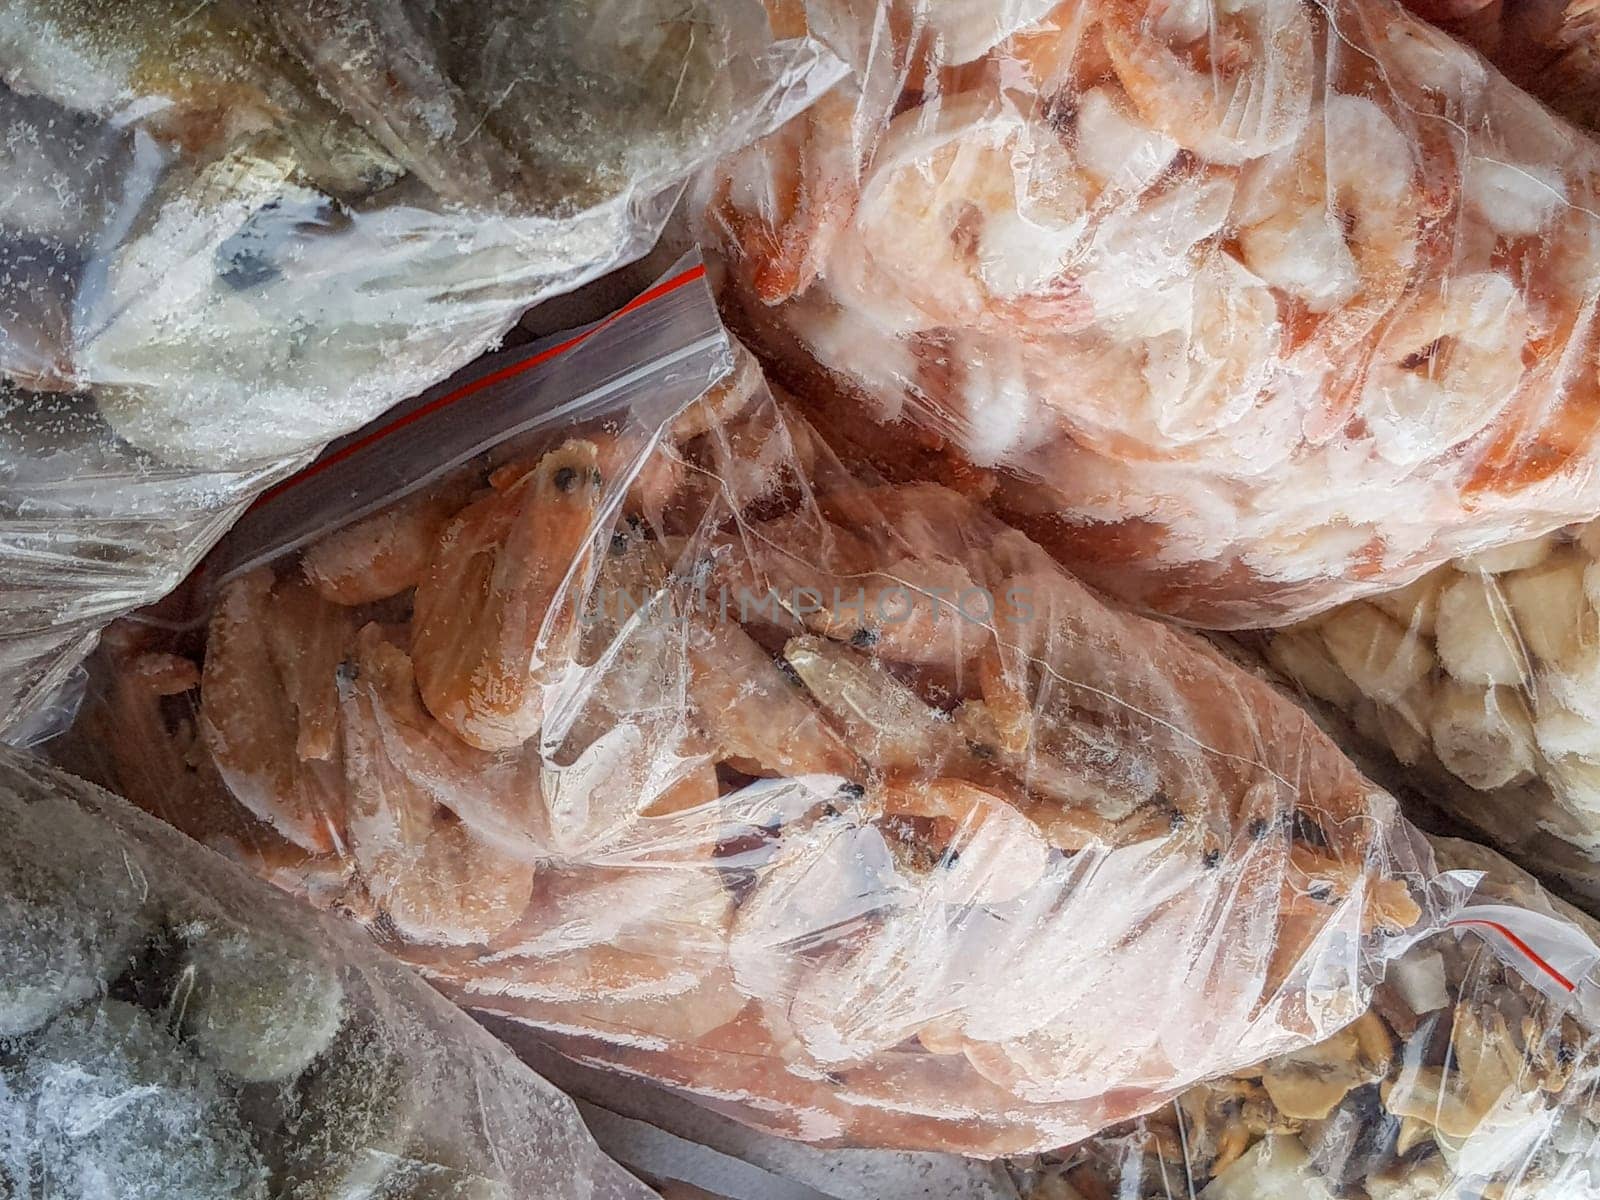 There are many large plastic bags with frozen raw and boiled shrimp on the counter of the fish market